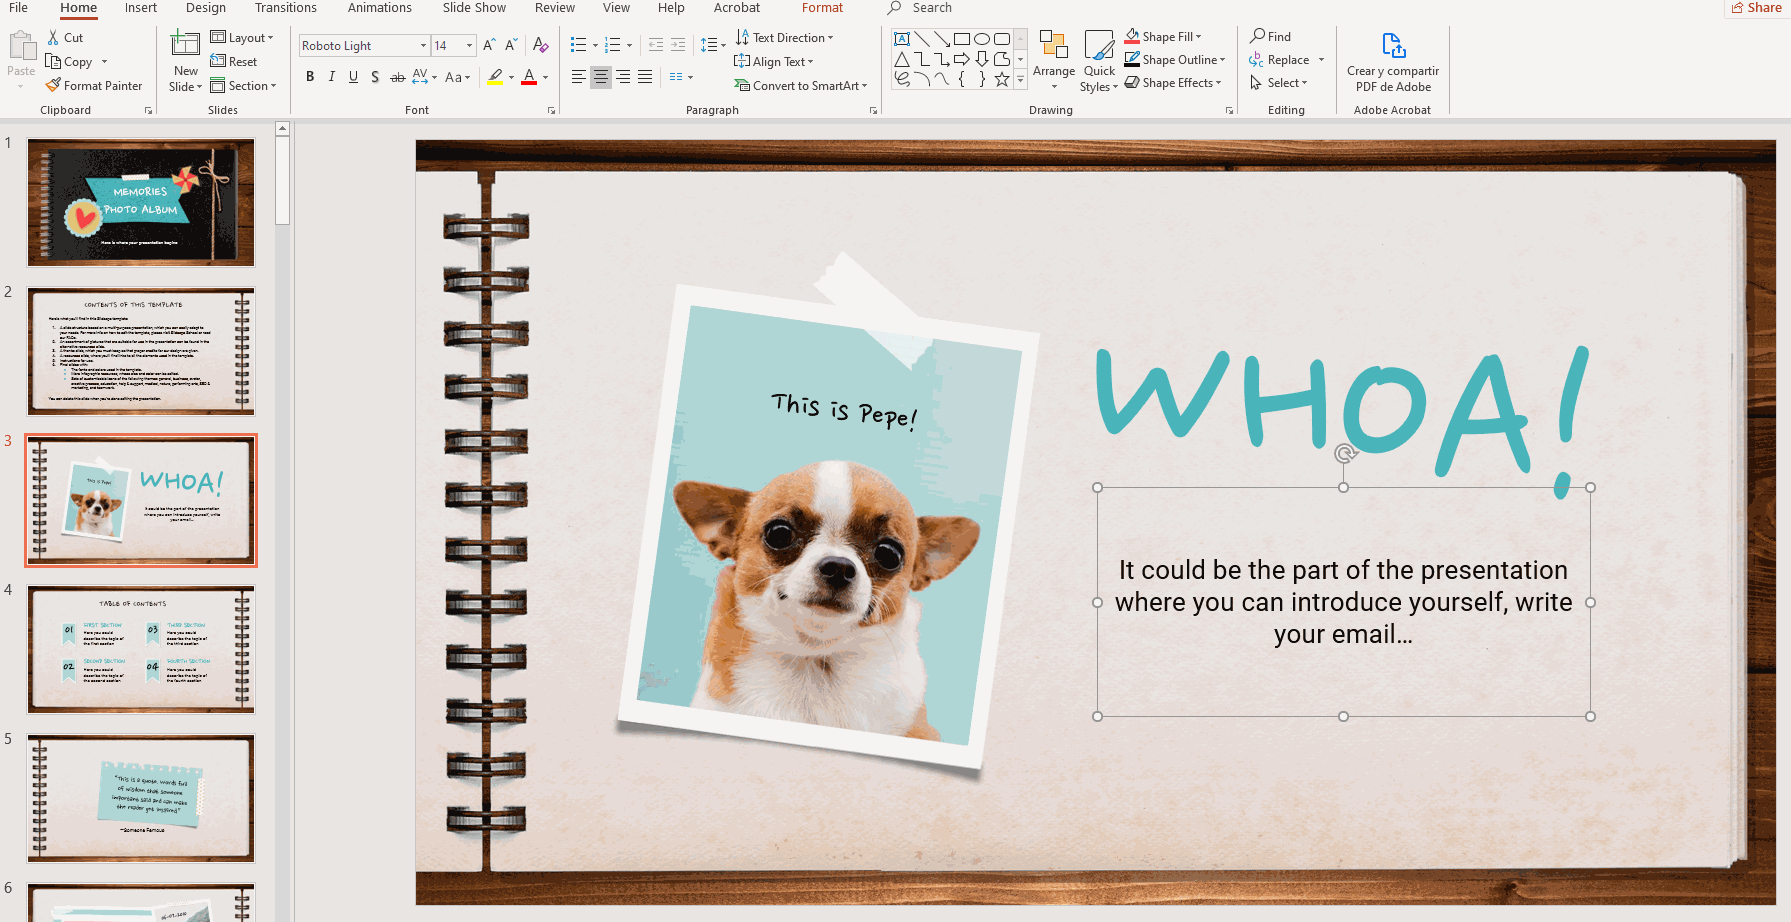 cach lam powerpoint 7 2